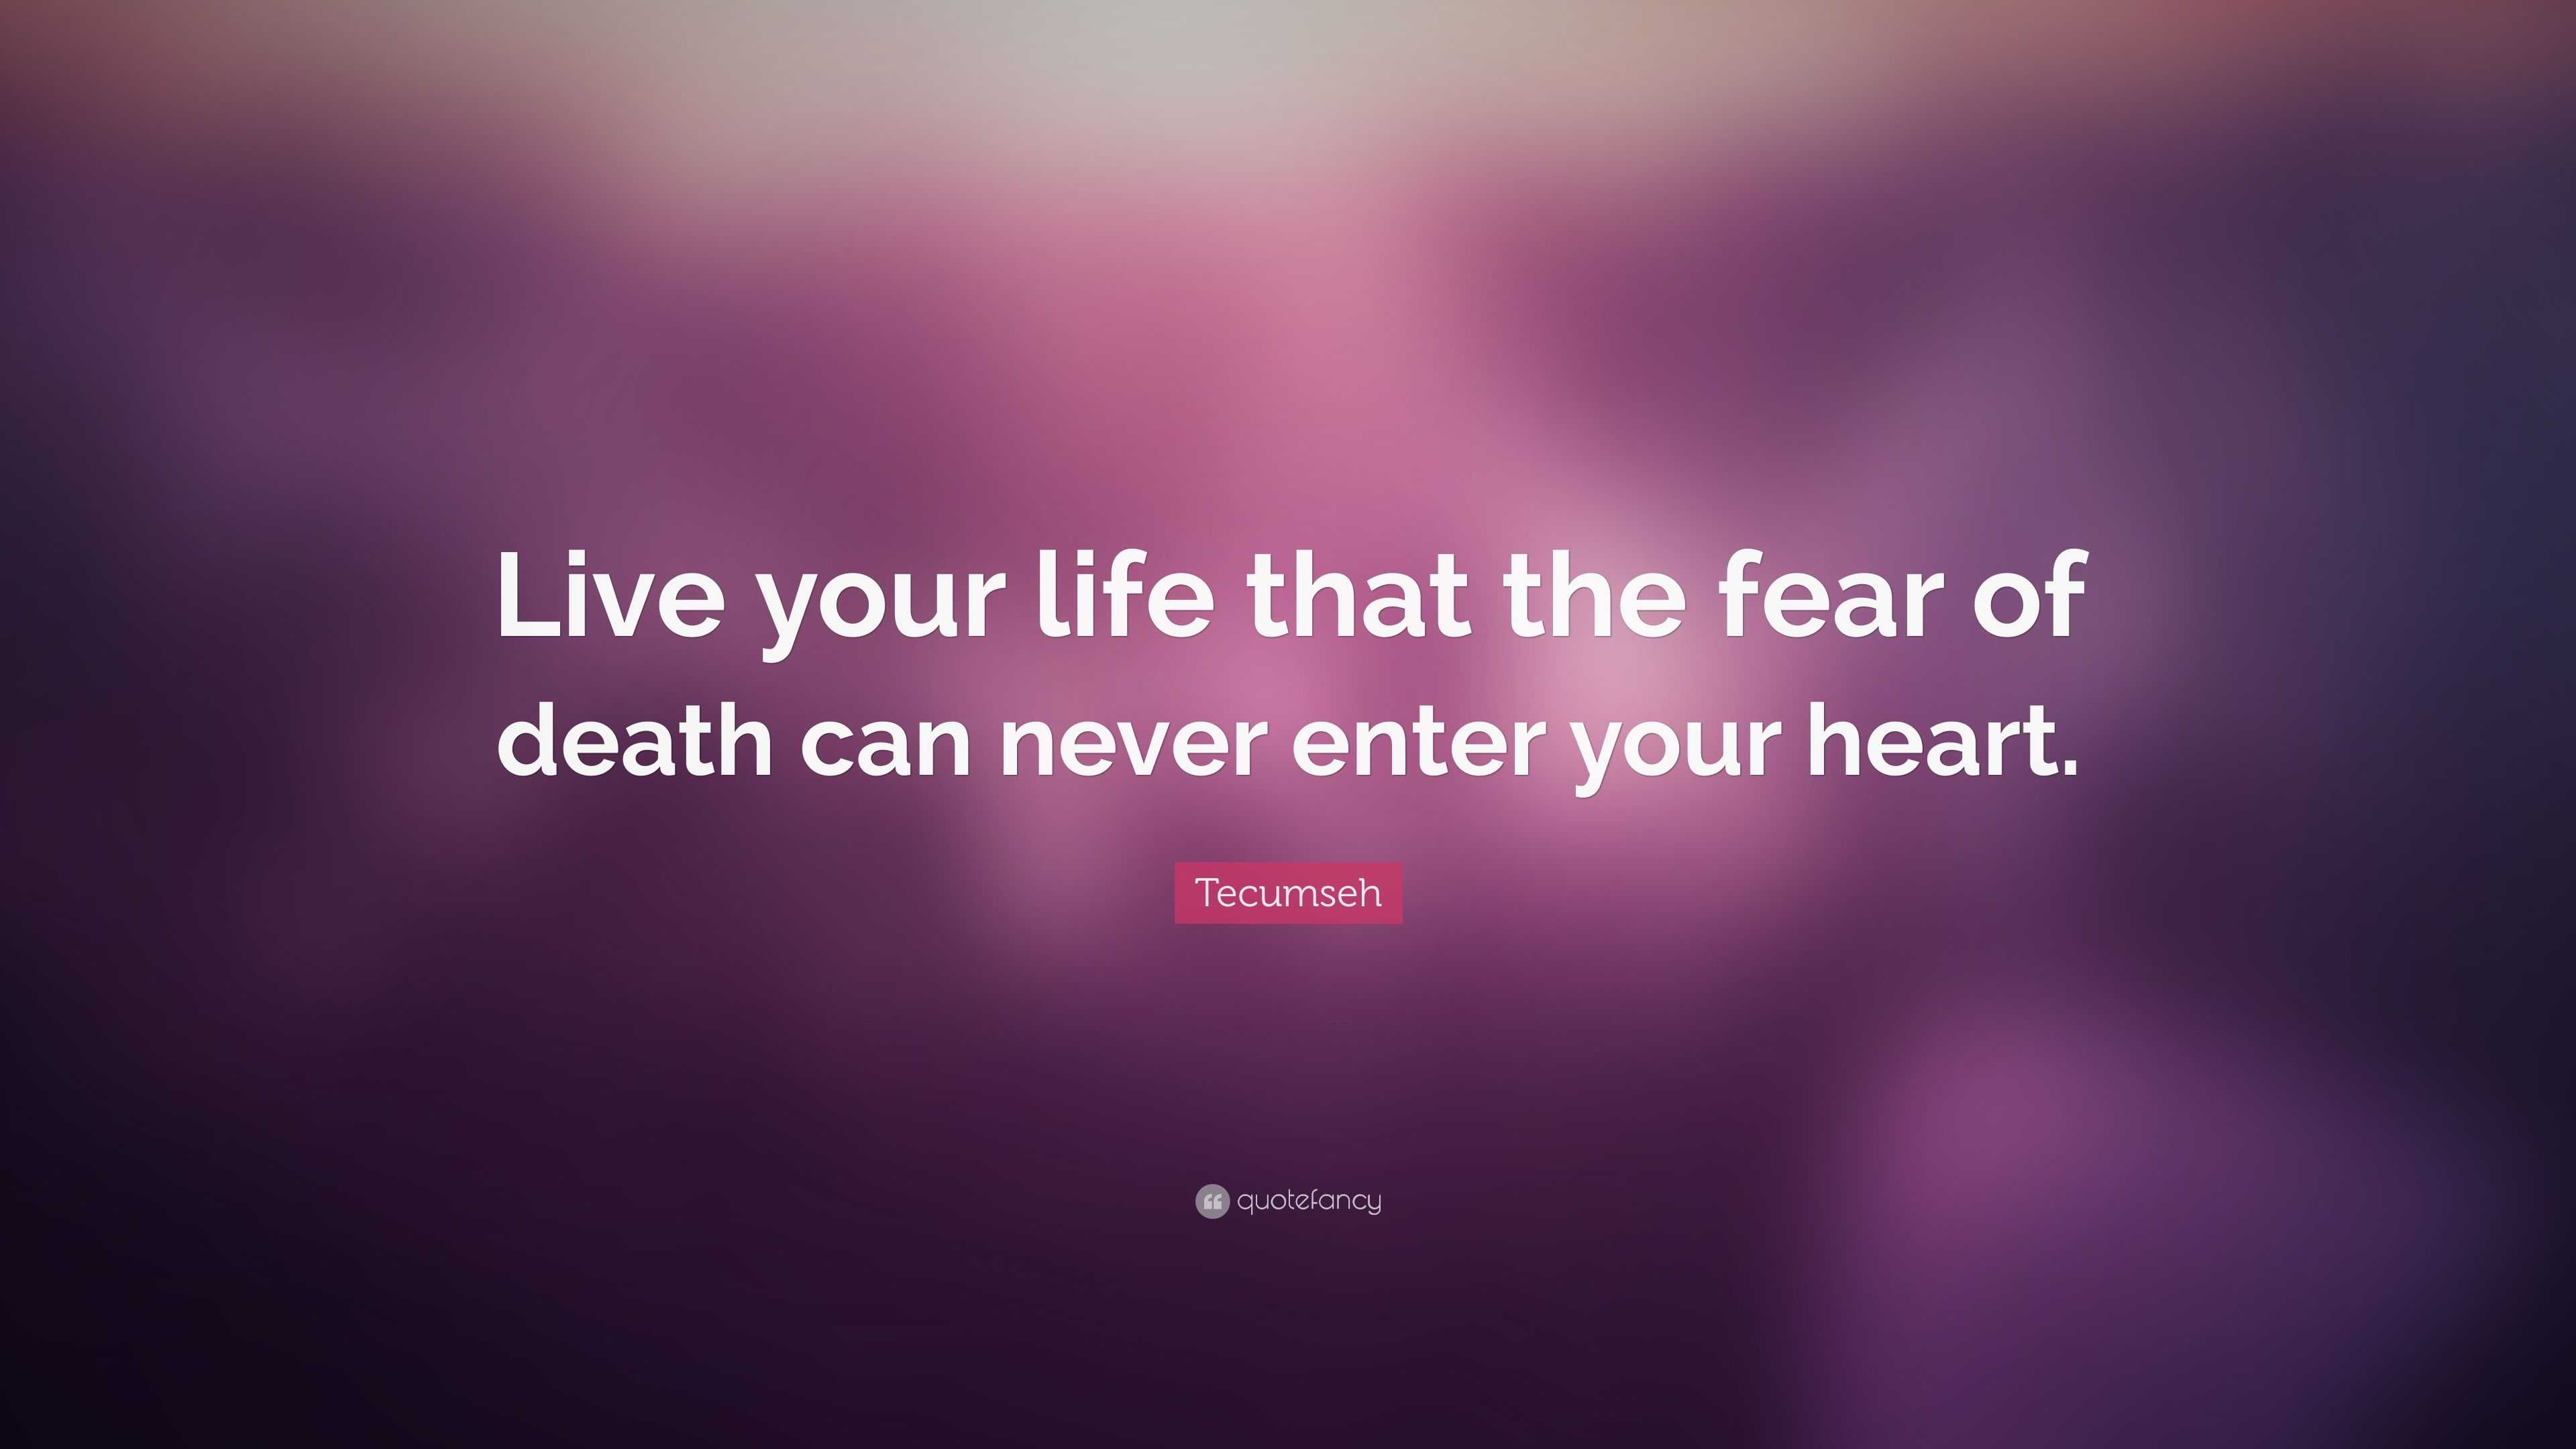 Tecumseh Quote: “Live your life that the fear of death can never enter ...